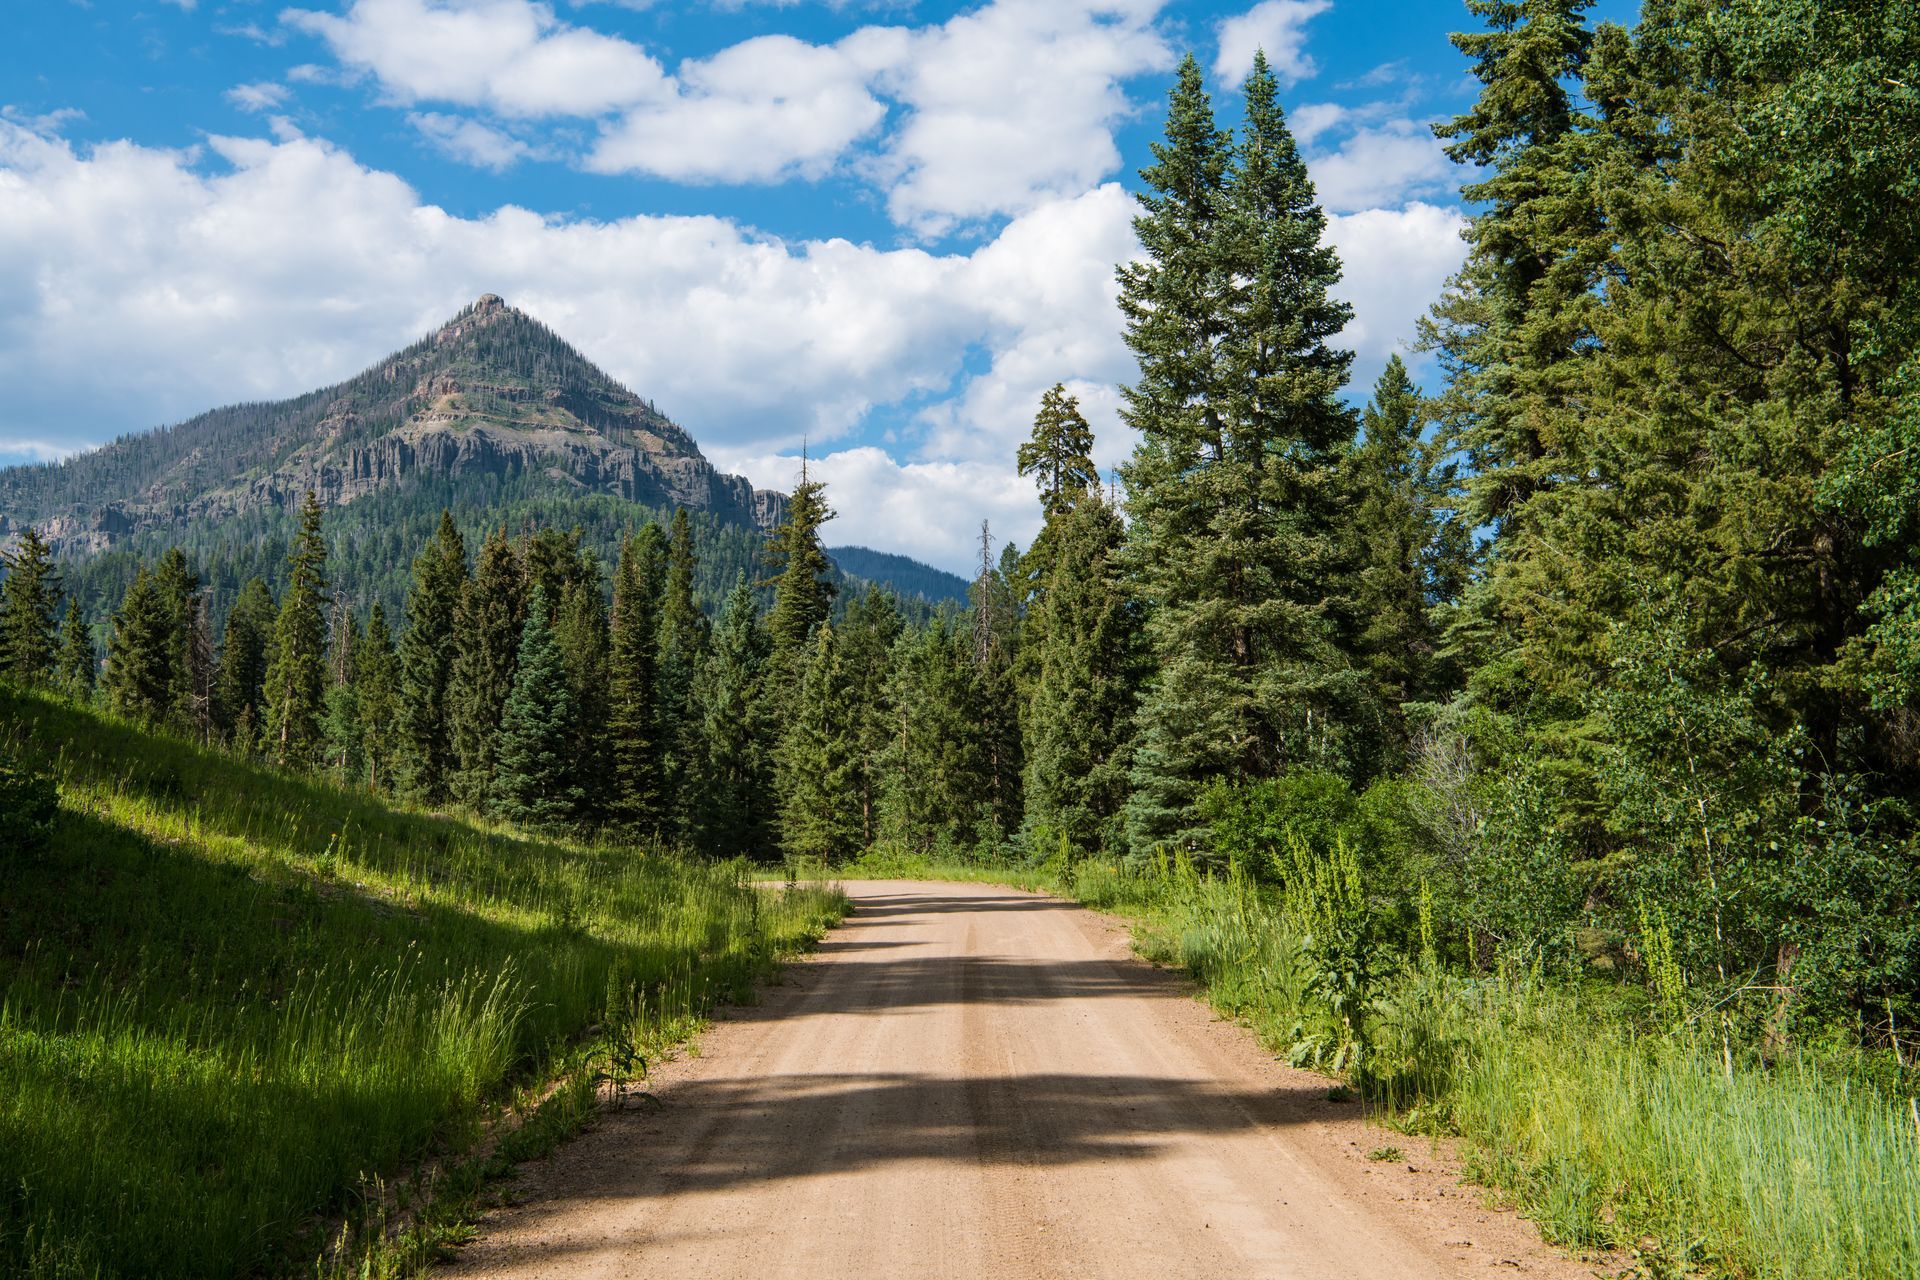 a dirt road going through a forest with a mountain in the background .